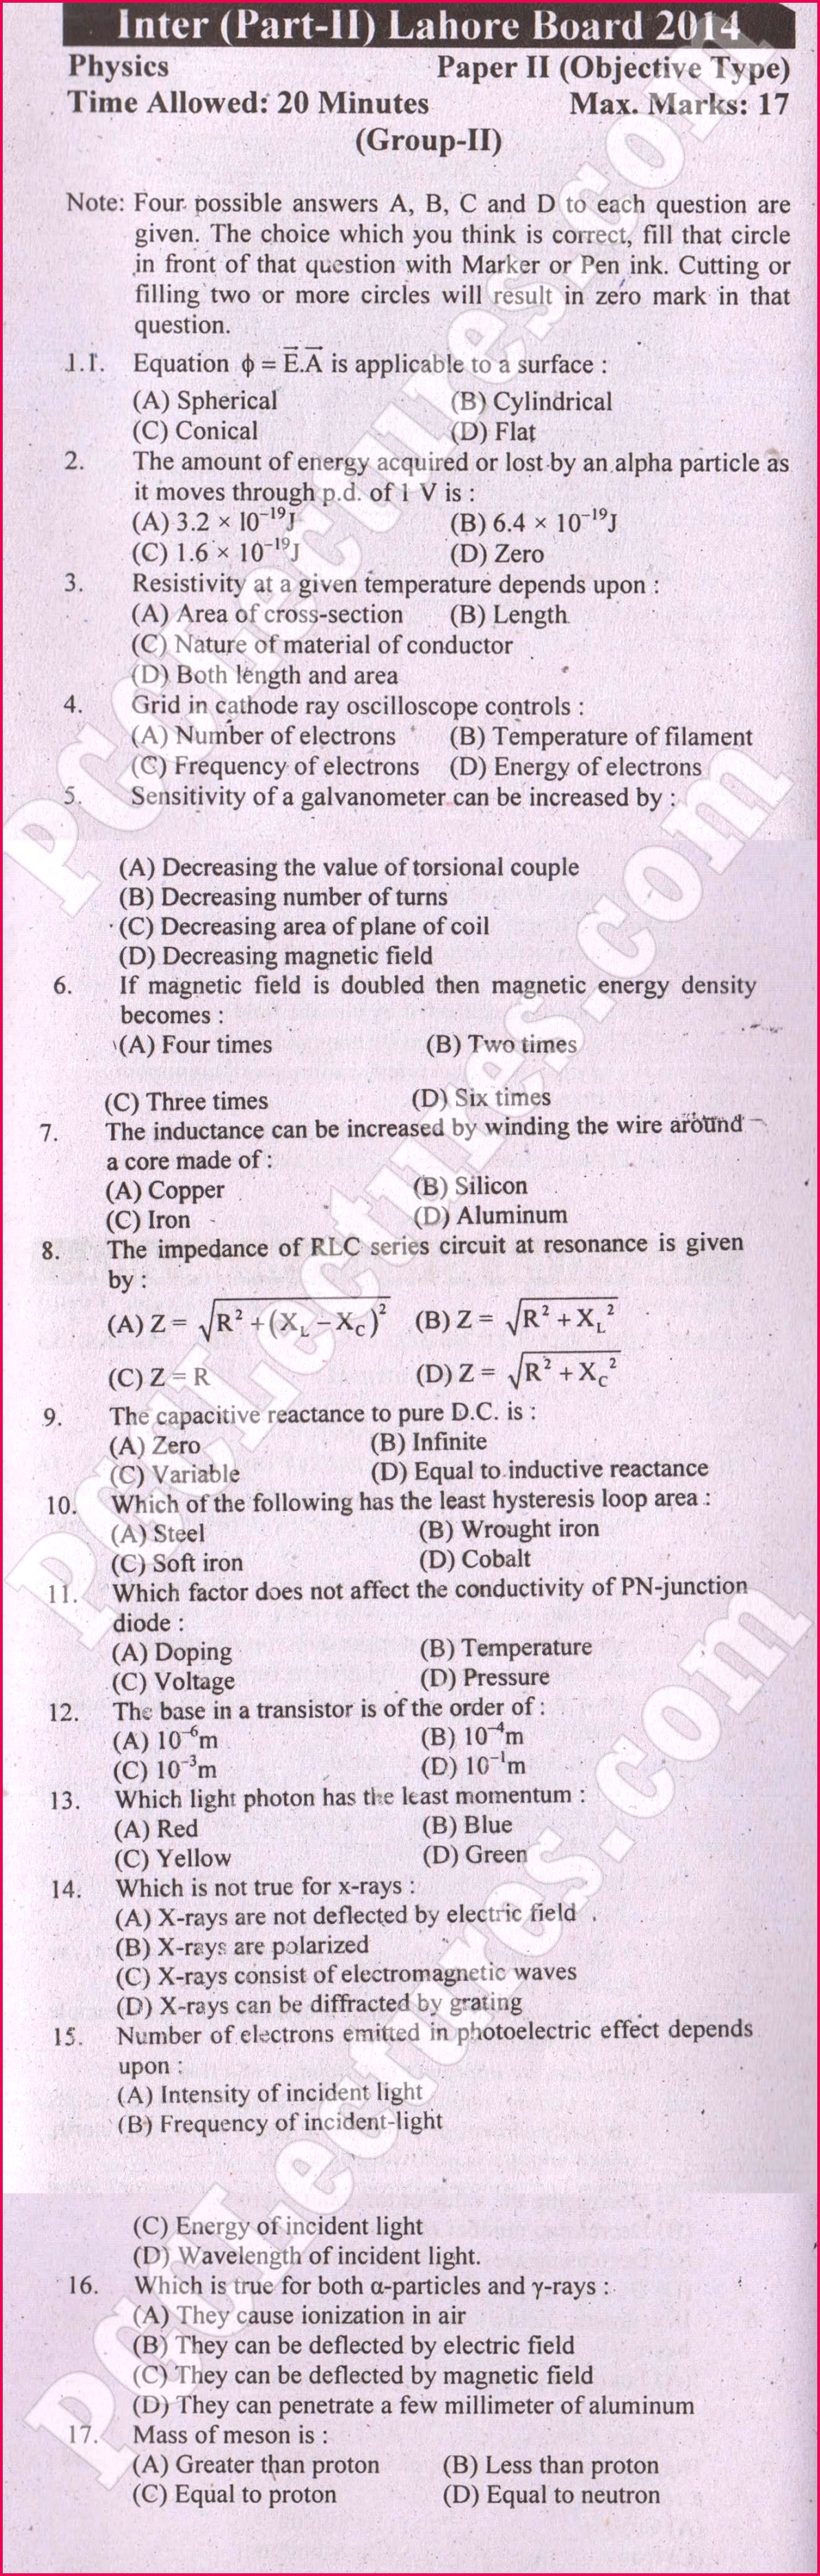 Past Papers Lahore Board 2014 Inter Part 2 Physics Group 2